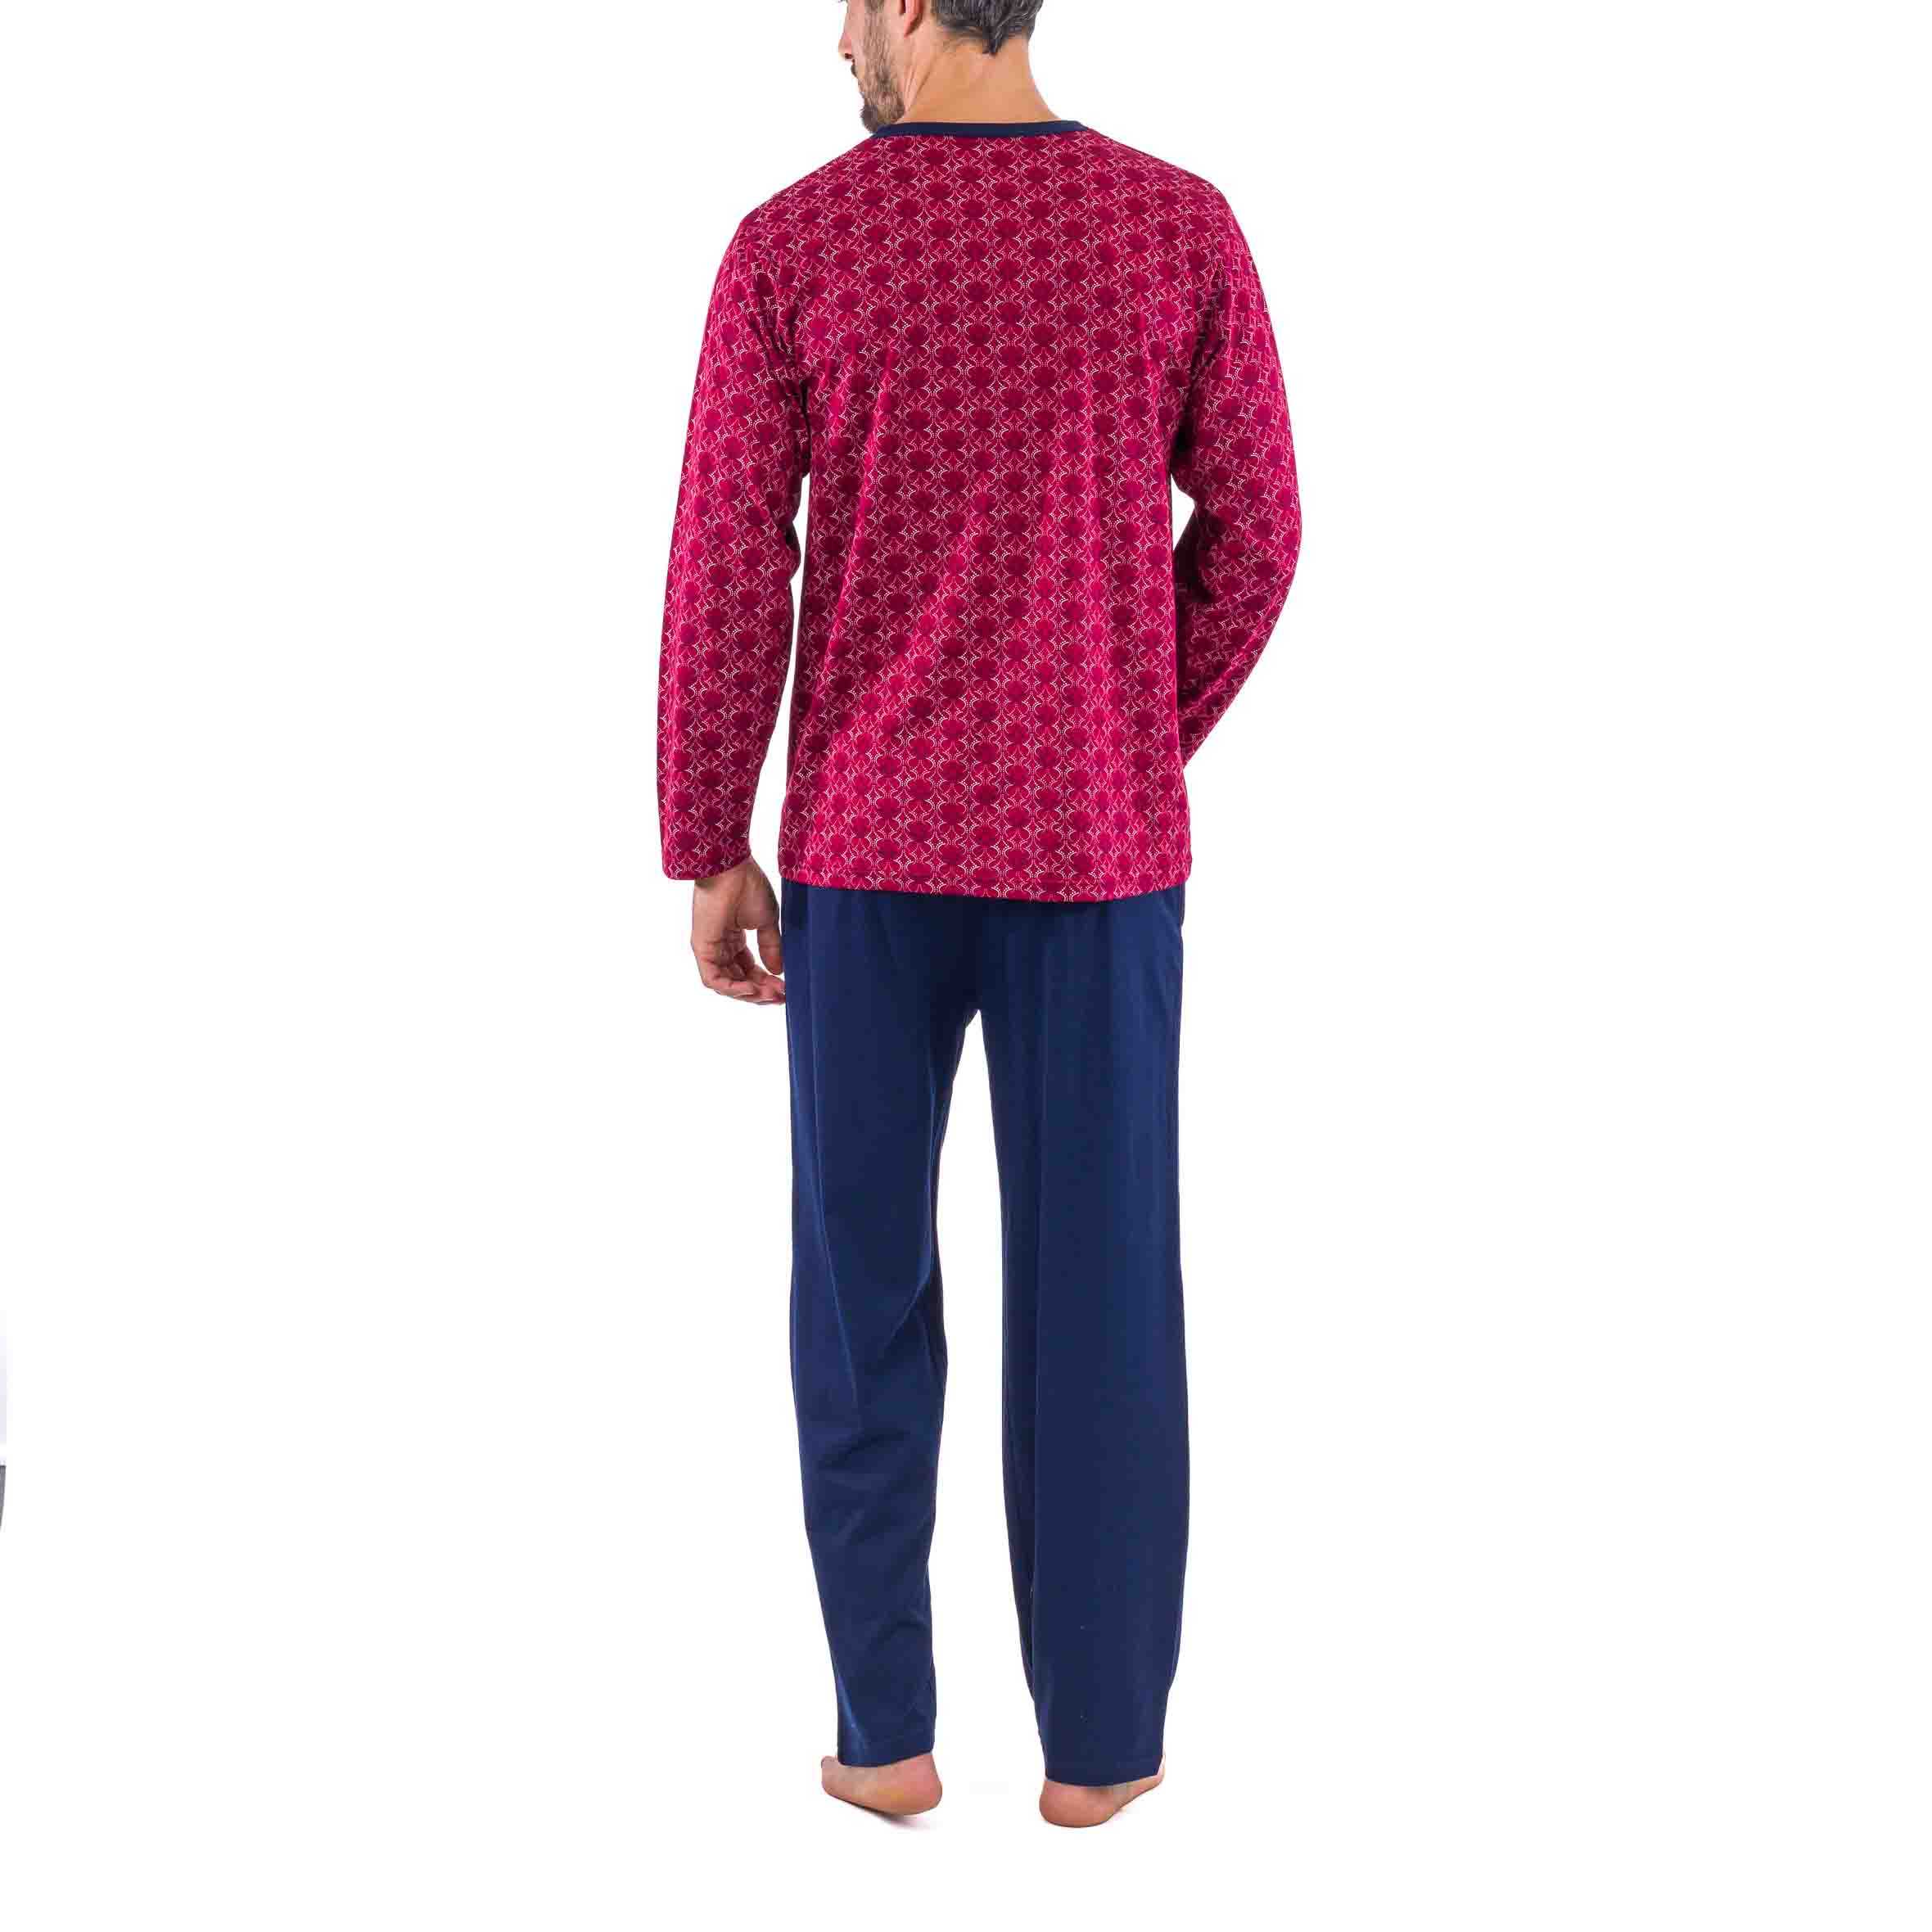 Buttoned Collar Pajamas in Mercerized Cotton Jersey with Retro Burgundy and Navy Print